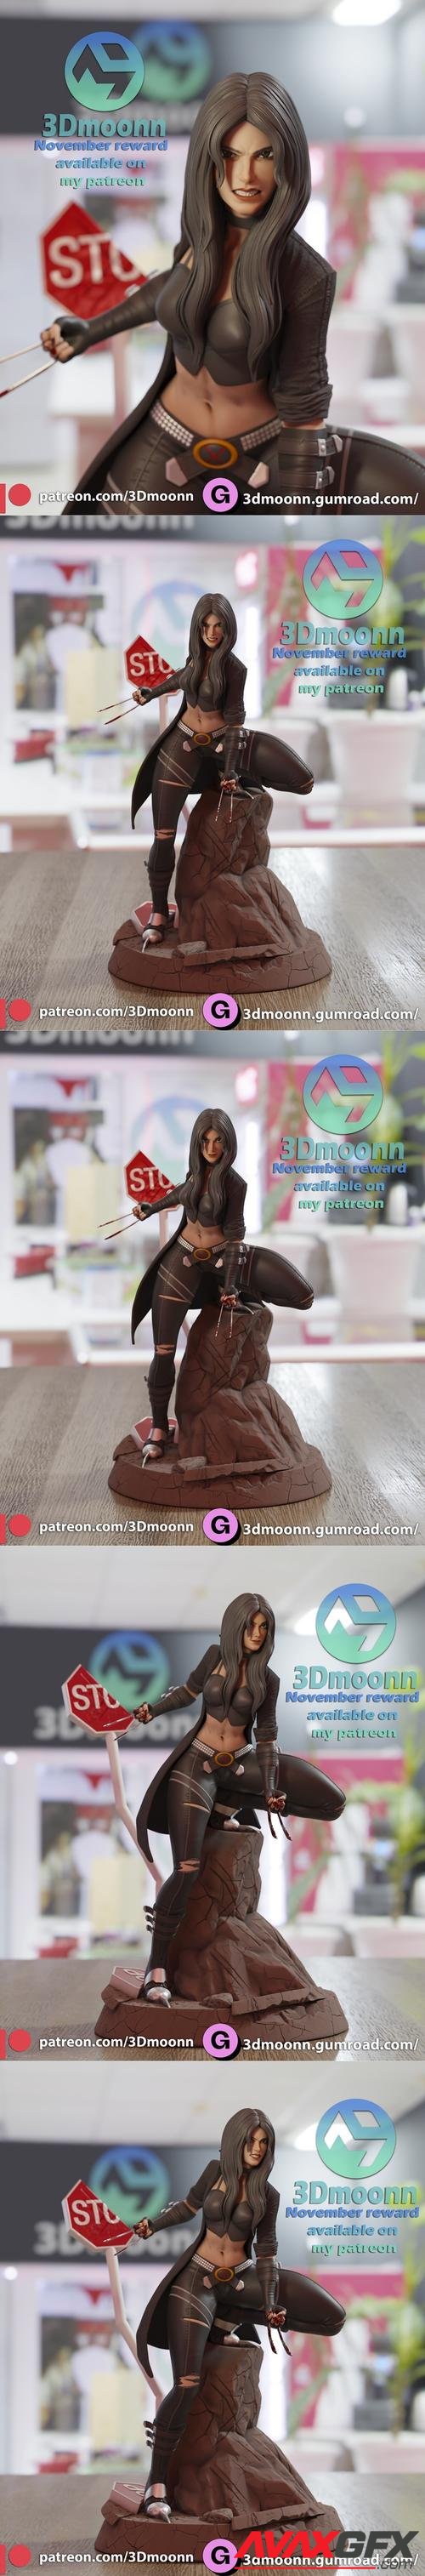 X-23 and NSFW Version and Bust - 3Dmoonn – 3D Print